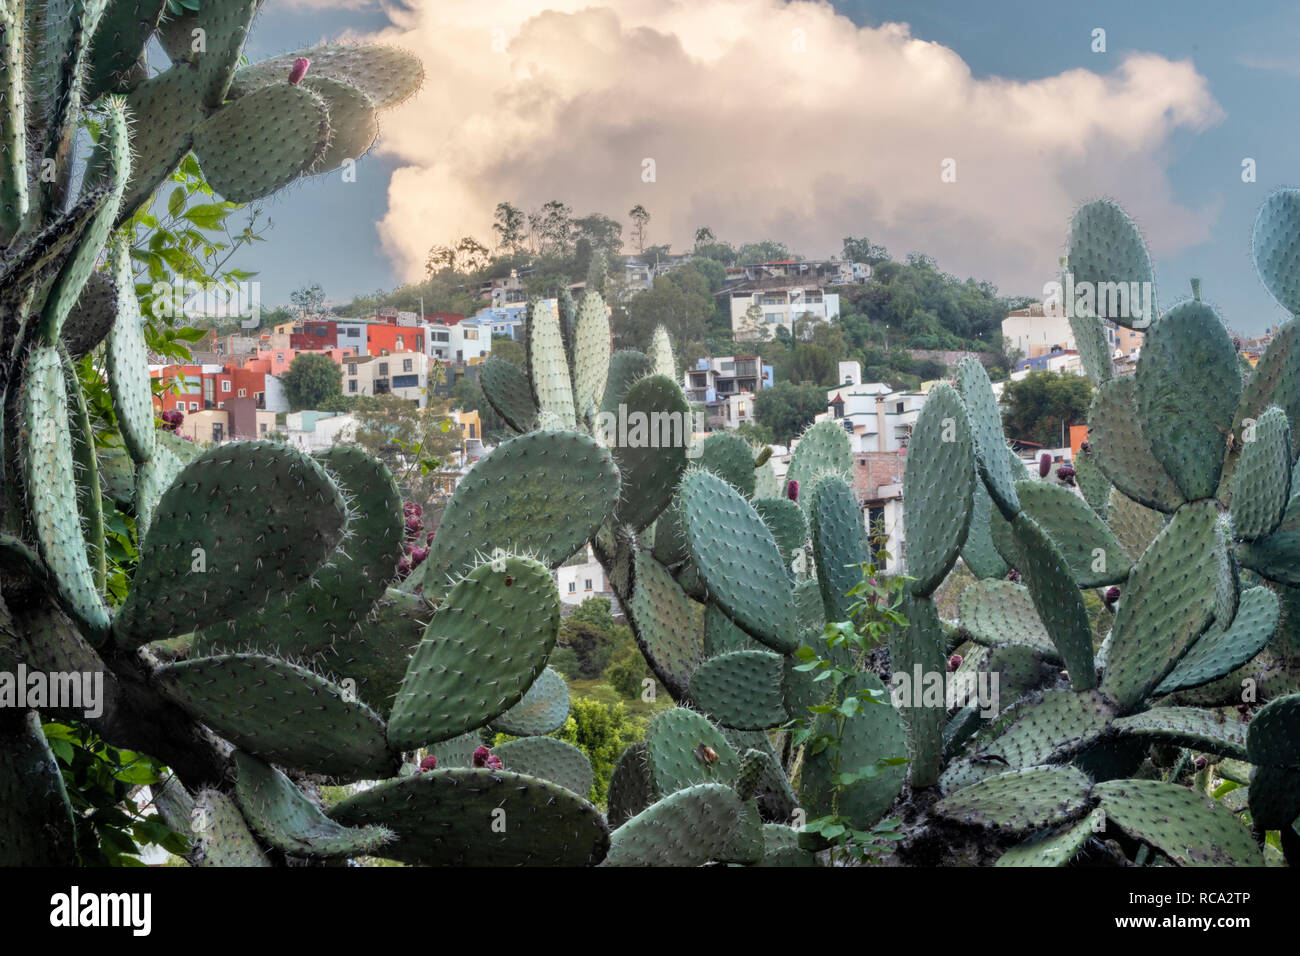 Prickly pear cactus with colorful houses on a hill in Guanajuato, Mexico Stock Photo